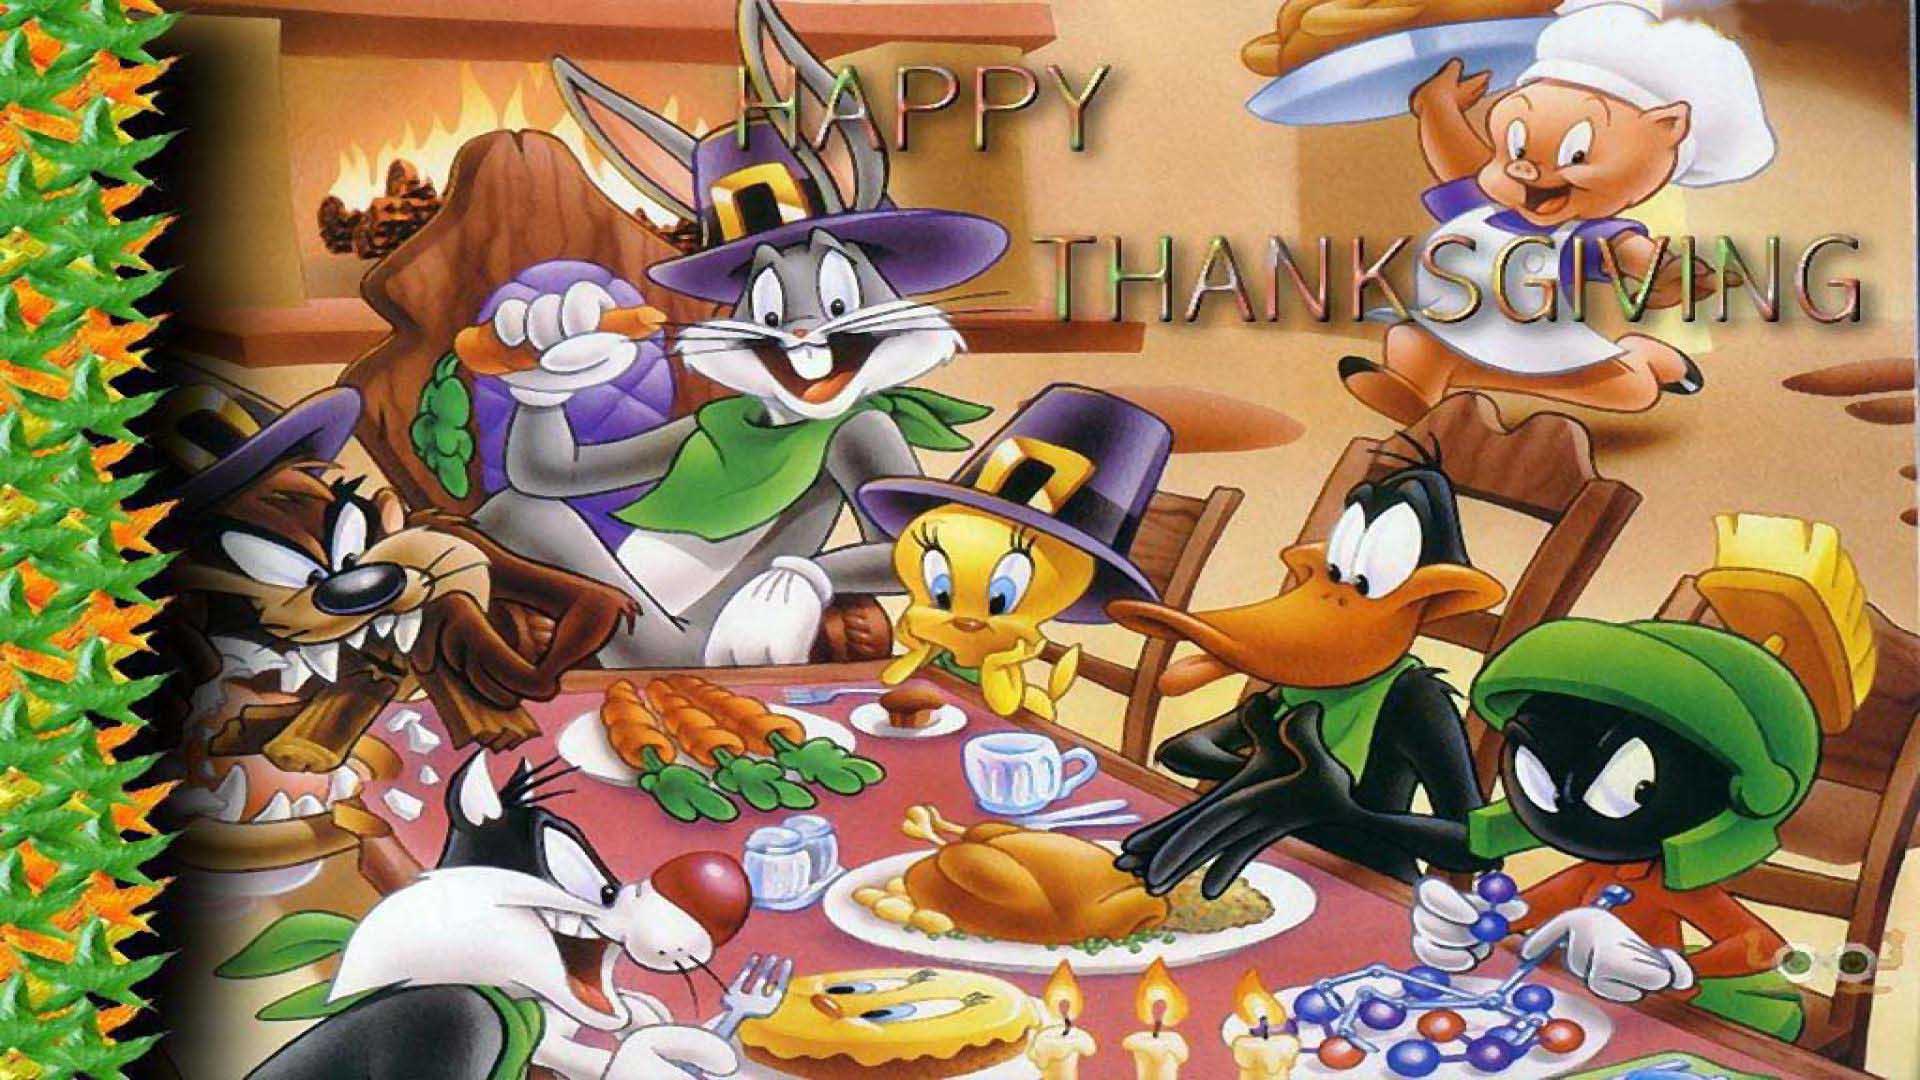 Disney Thanksgiving Wallpaper For Puter Background Pictures